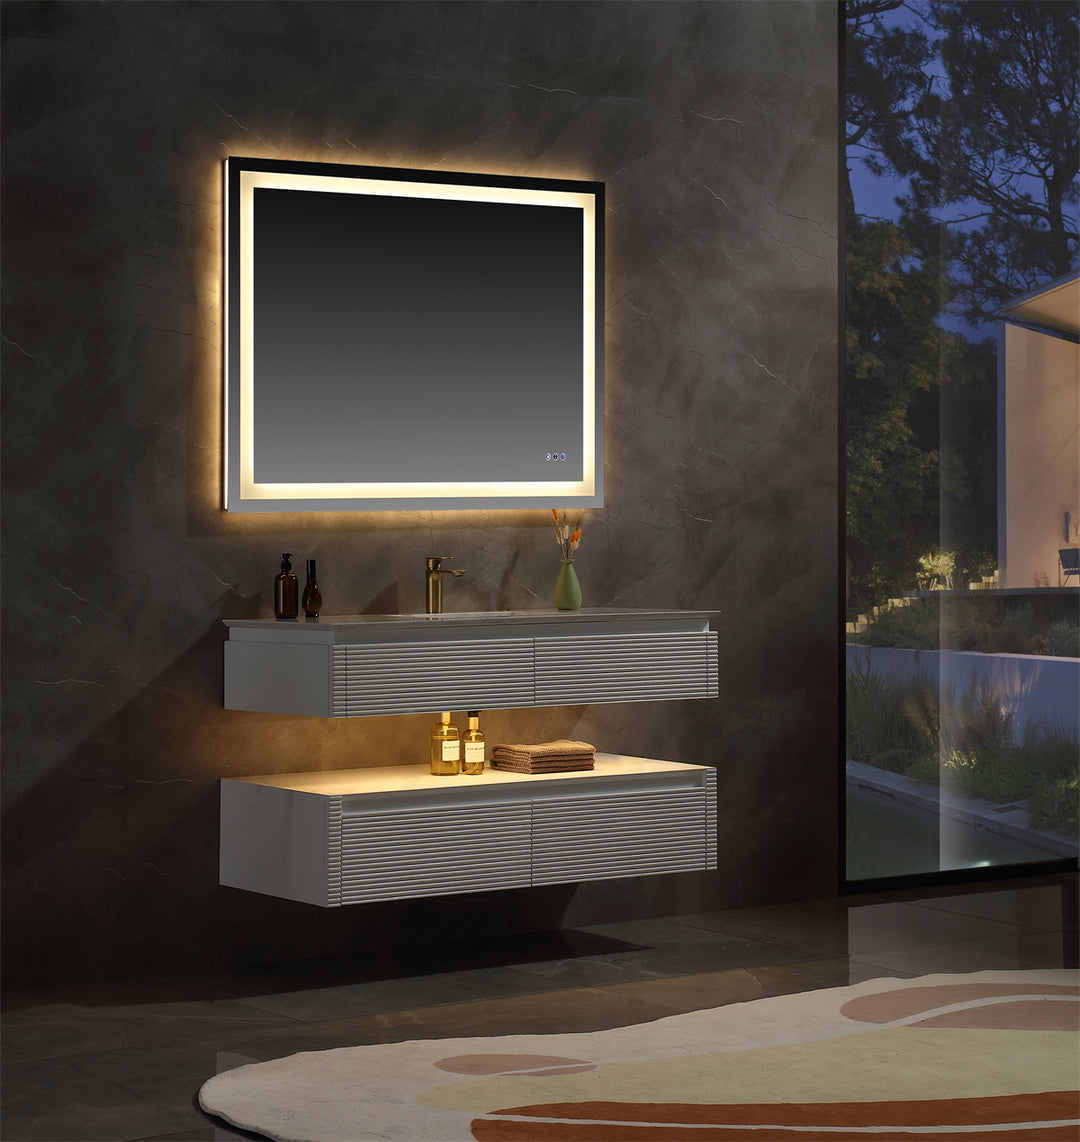 48" Floating Bathroom Vanity Set in White with Lights and White Marble Countertop